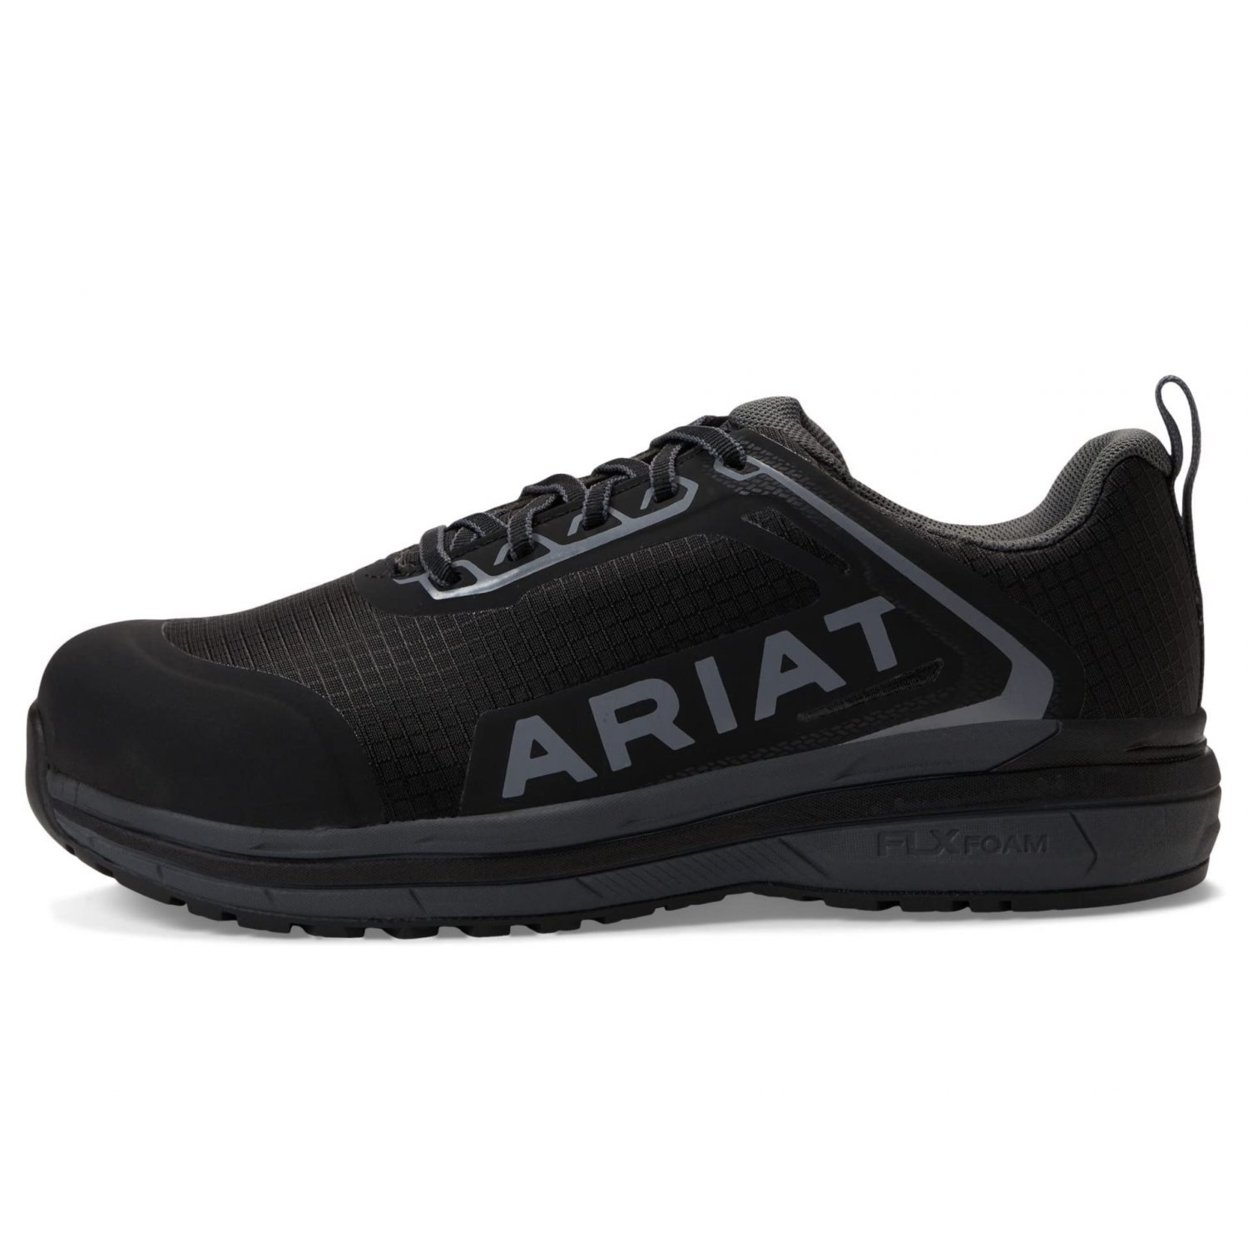 ARIAT Women's Outpace Composite Toe Safety Shoe Fire ONE SIZE BLACK - BLACK, 9